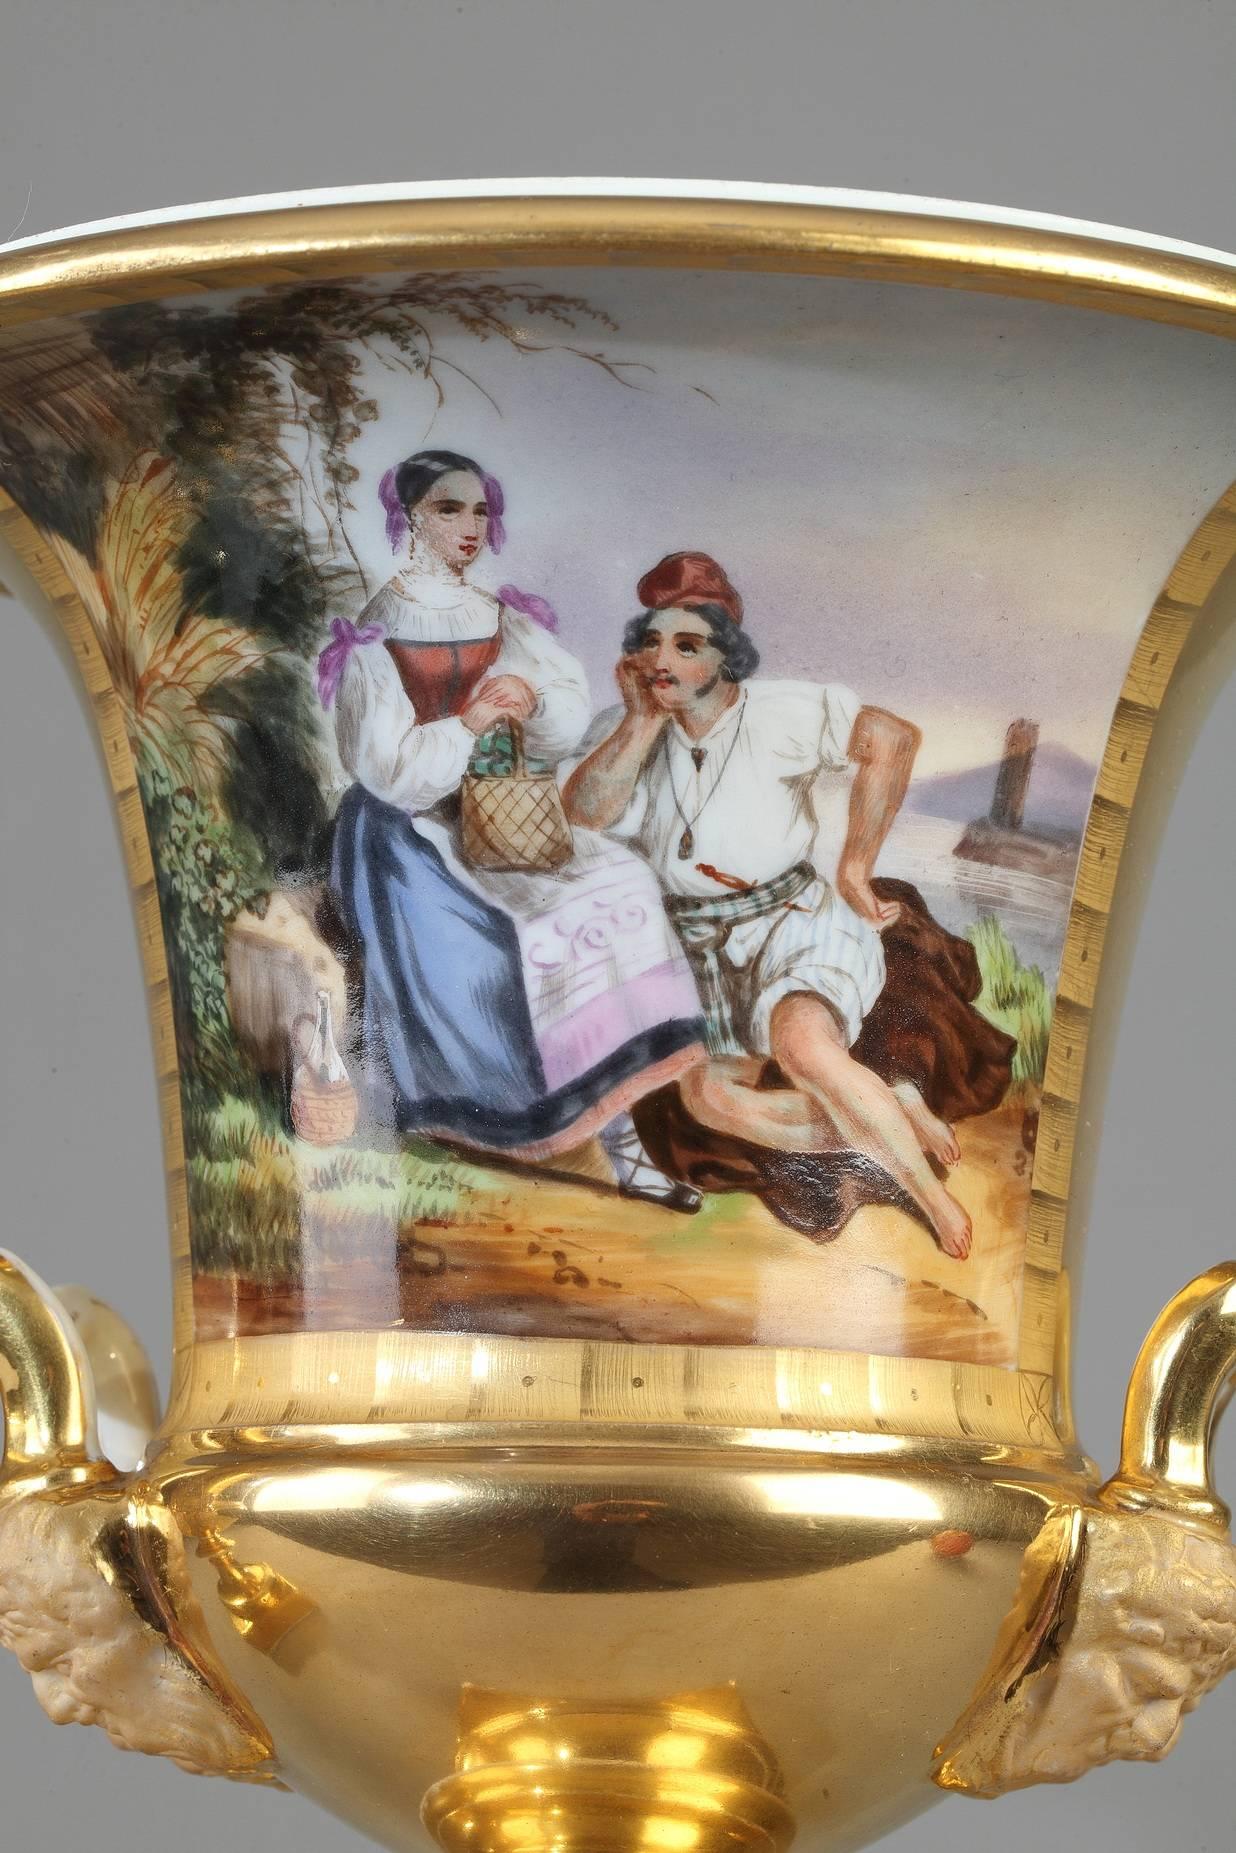 Pair of restauration Medici vases in multicolored porcelain and gold, decorated with large cartouches featuring Italian peasants on one side and Italian landscapes on the other. The neck, handles, and base are gilded. Each vase is set on a square